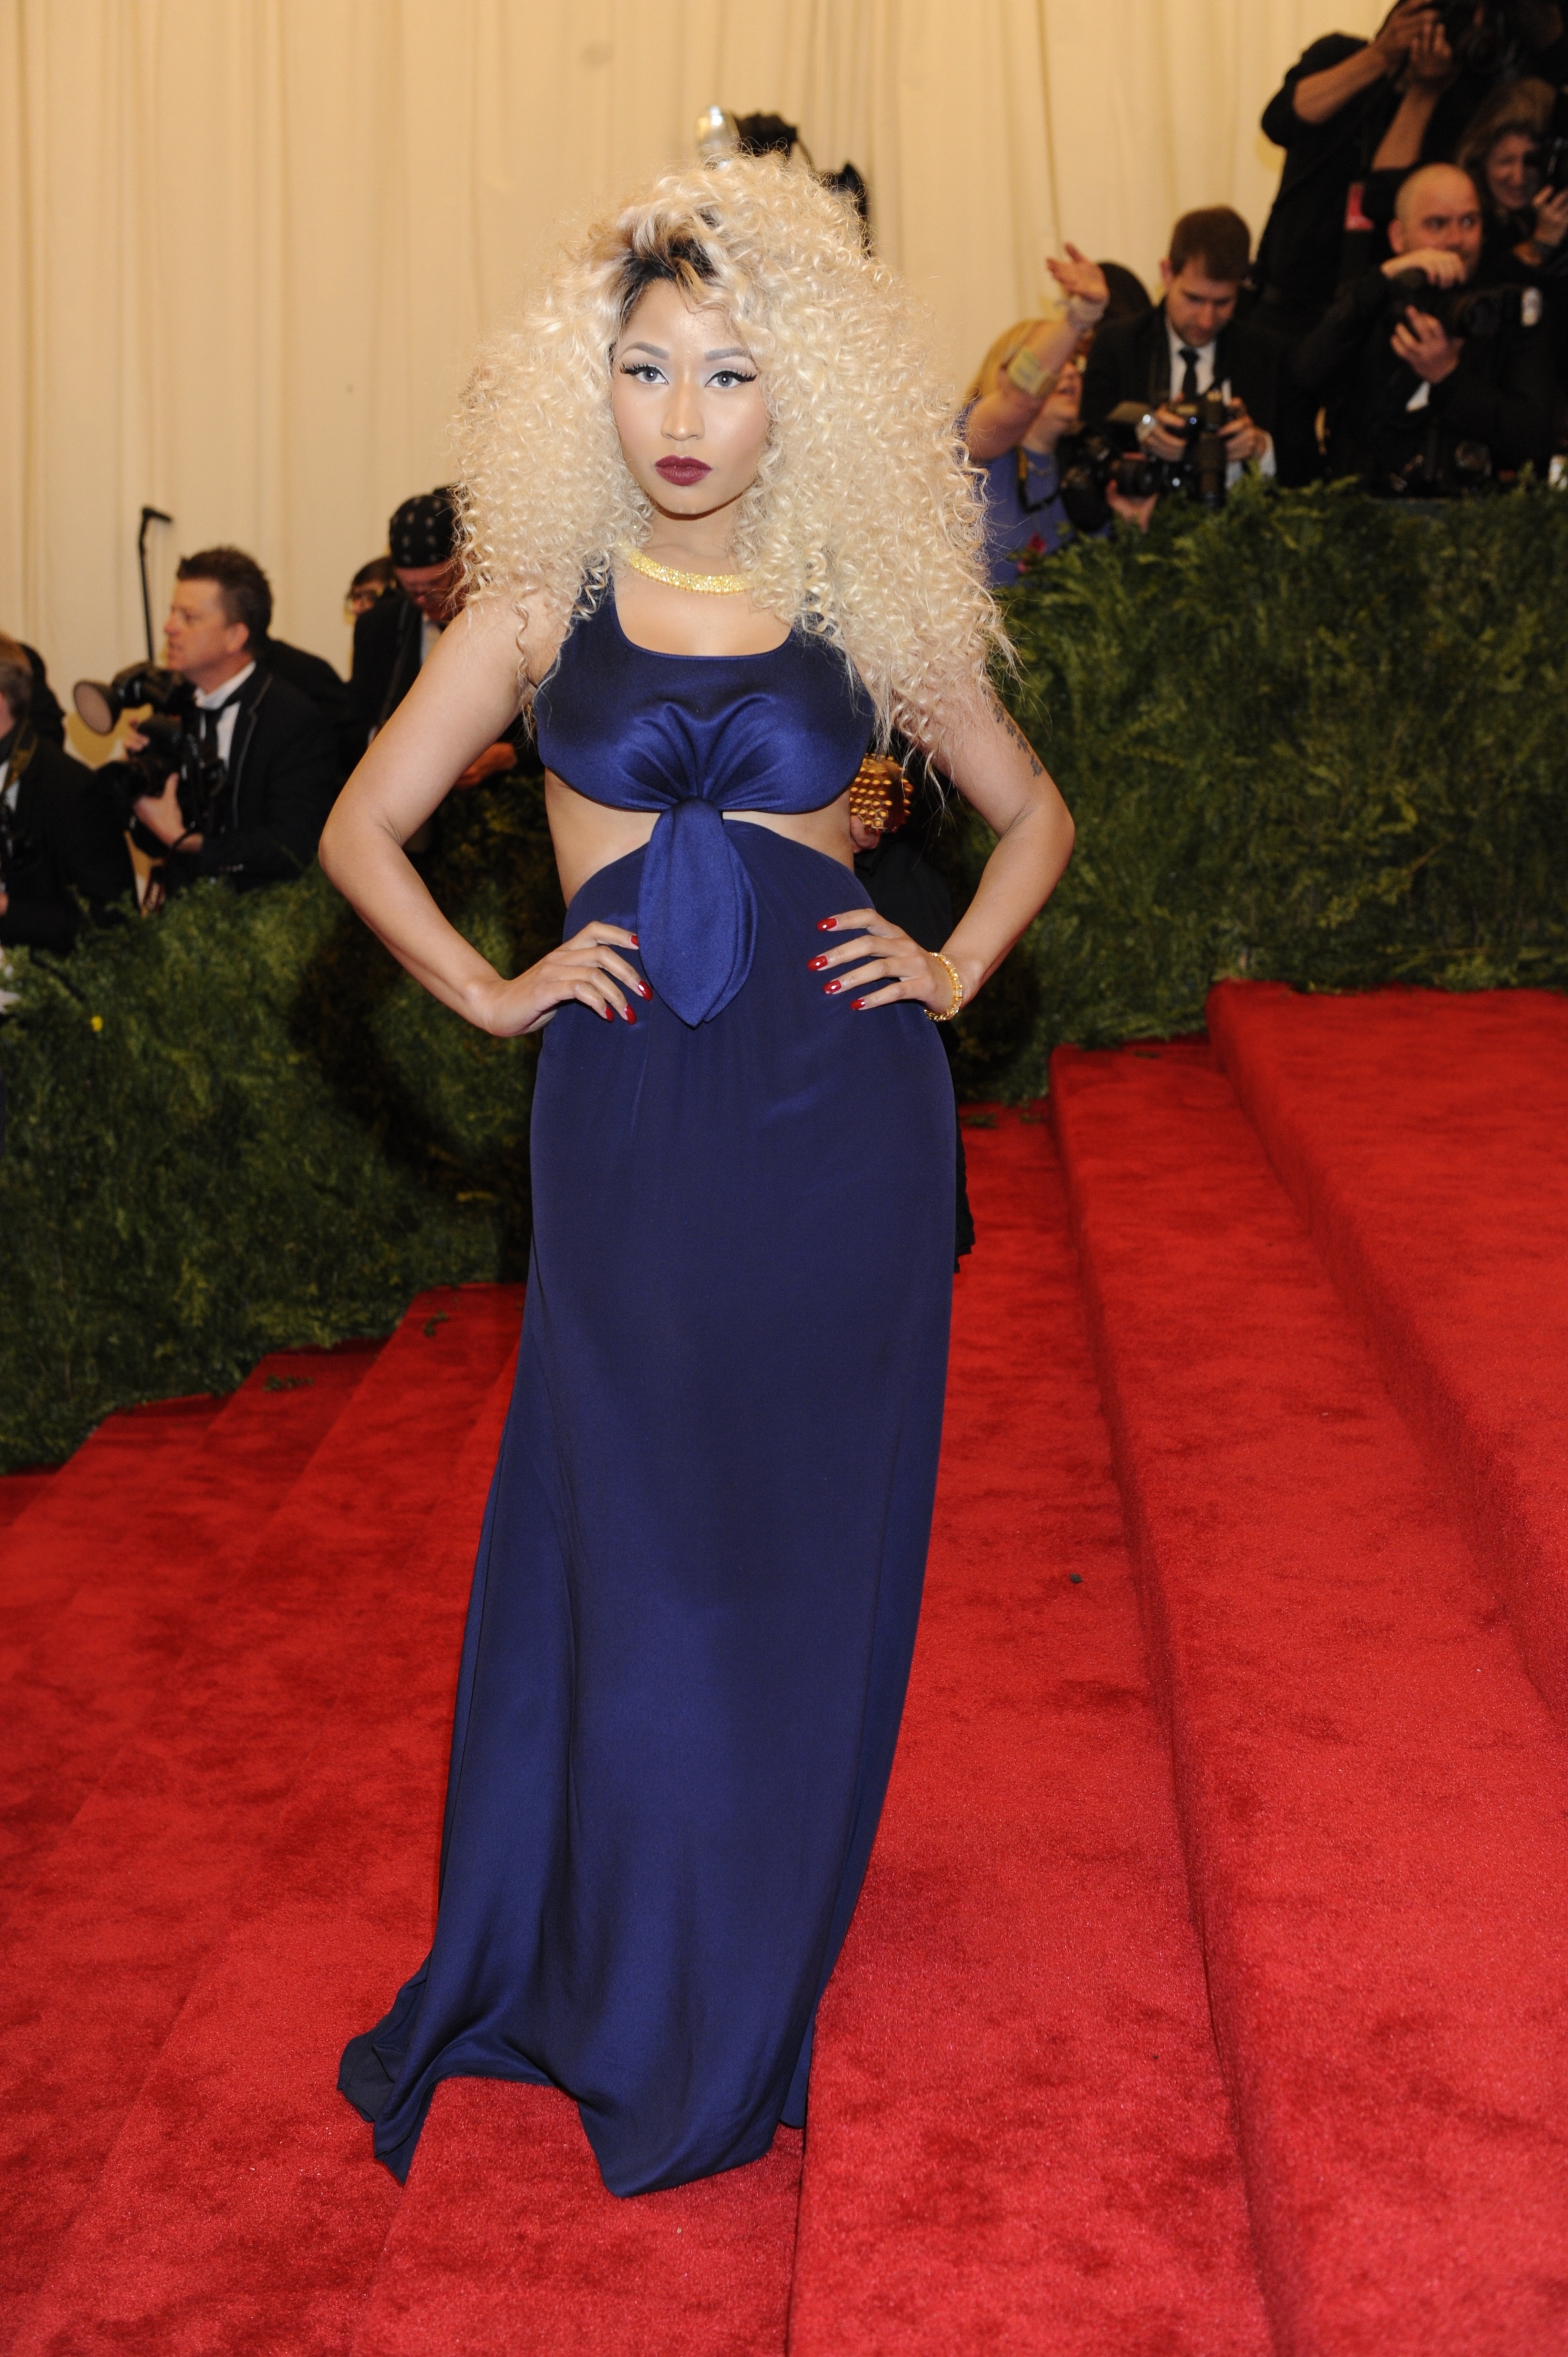 Nicki Minaj in an elegant blue dress with cut-out detail, hands on hips, at a red carpet event